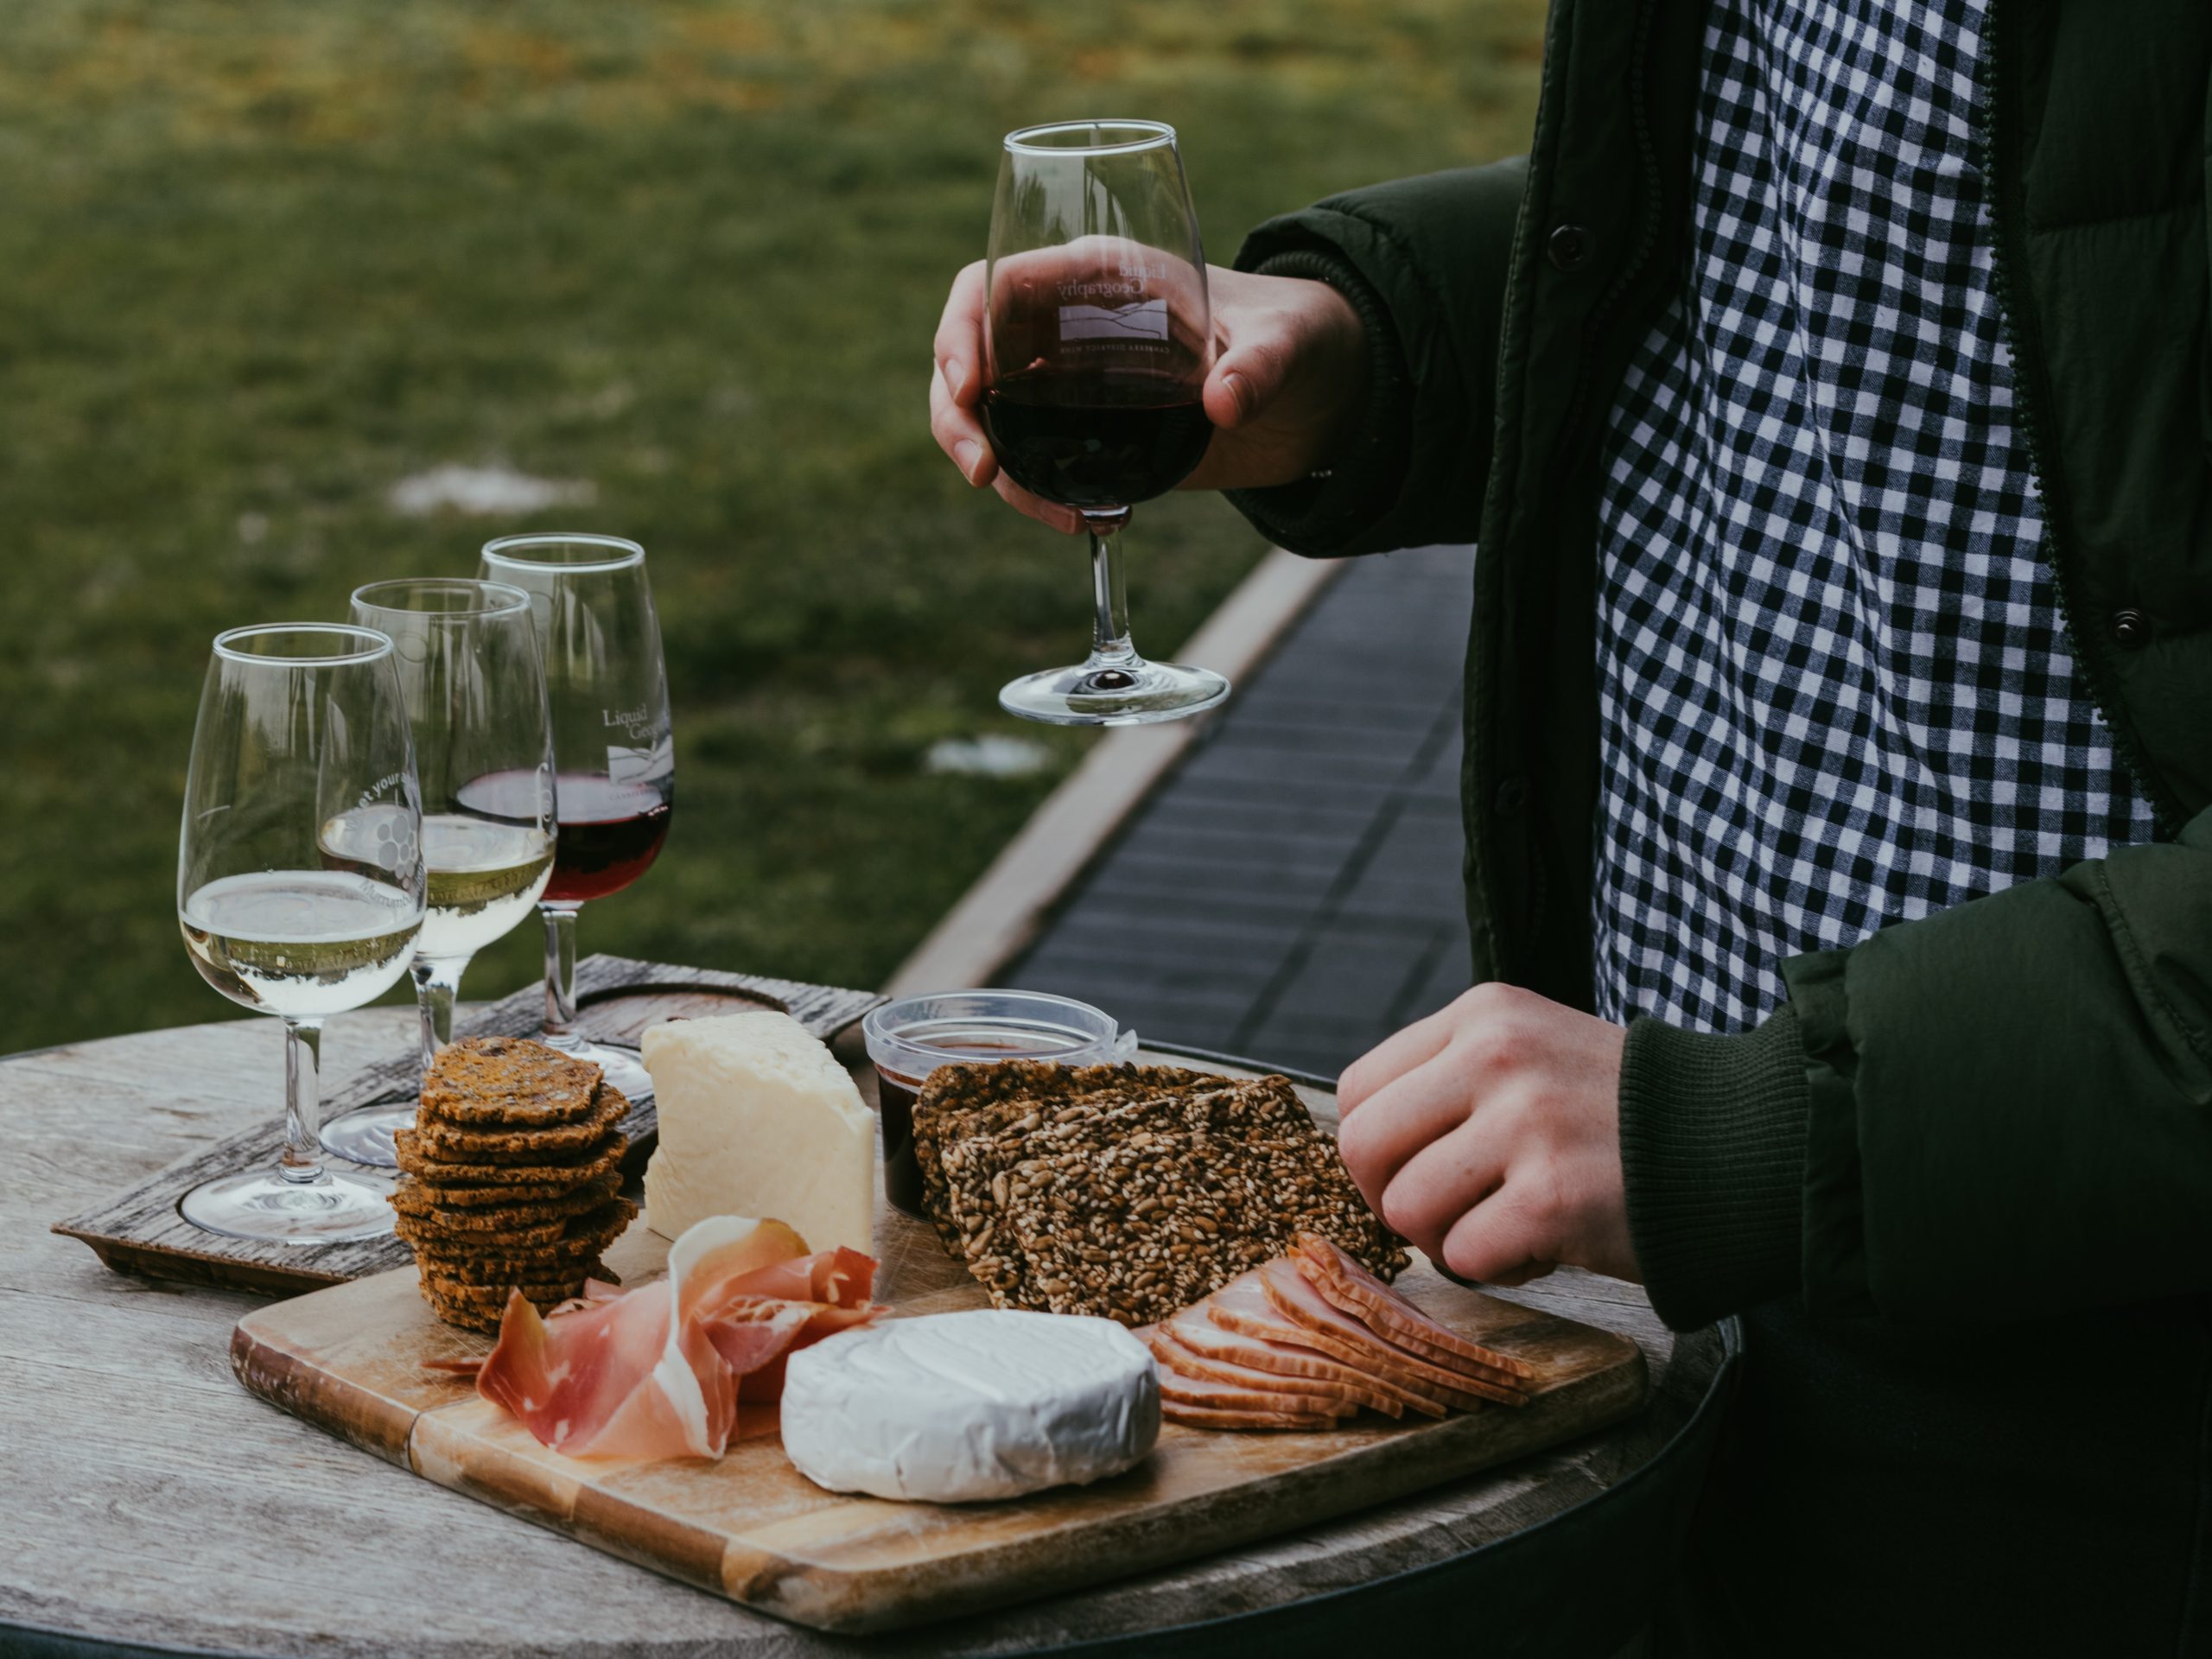 Chelsea Pridham Wine and Cheese picture